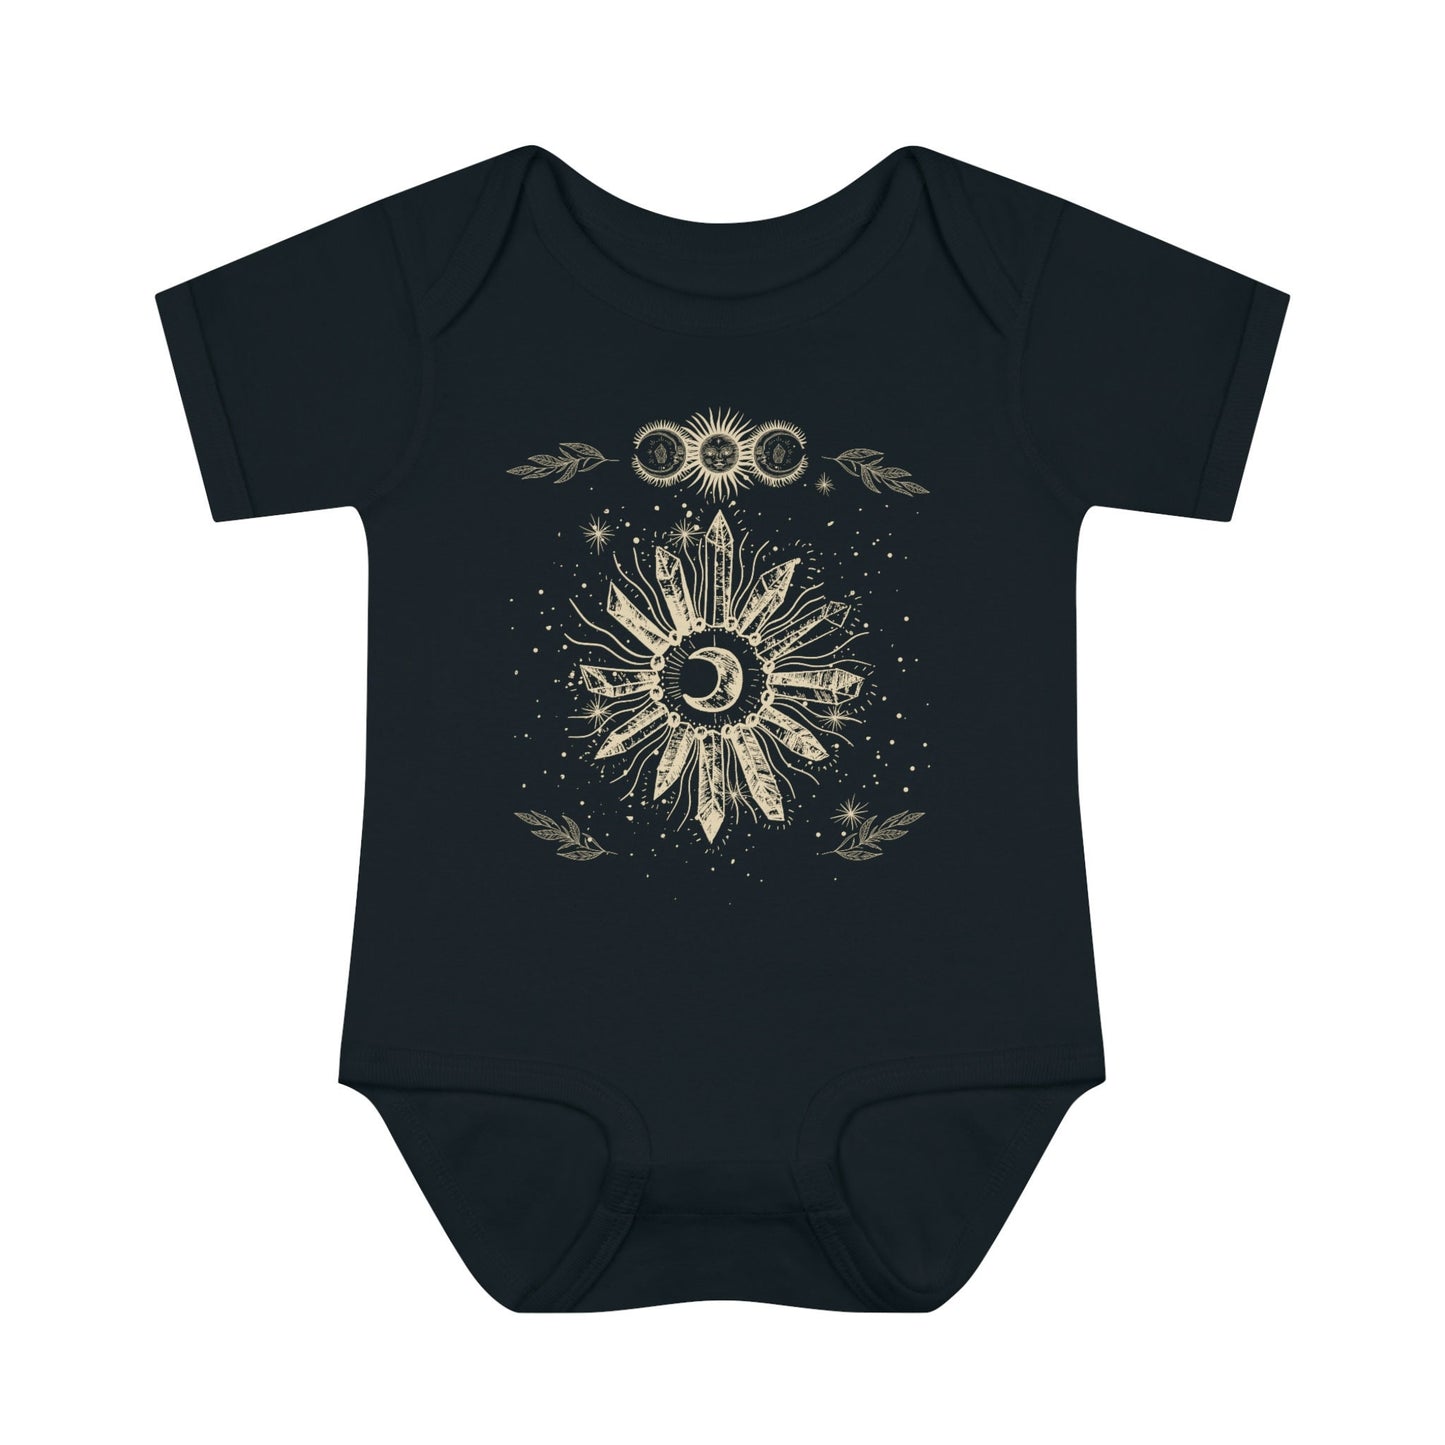 Sun and Moon Baby Bodysuit Boho Baby Bodysuit Mystical Baby Witchy Baby Clothes Goth Baby Clothes Alt Baby Shirt Hippie Crystal Bodysuit